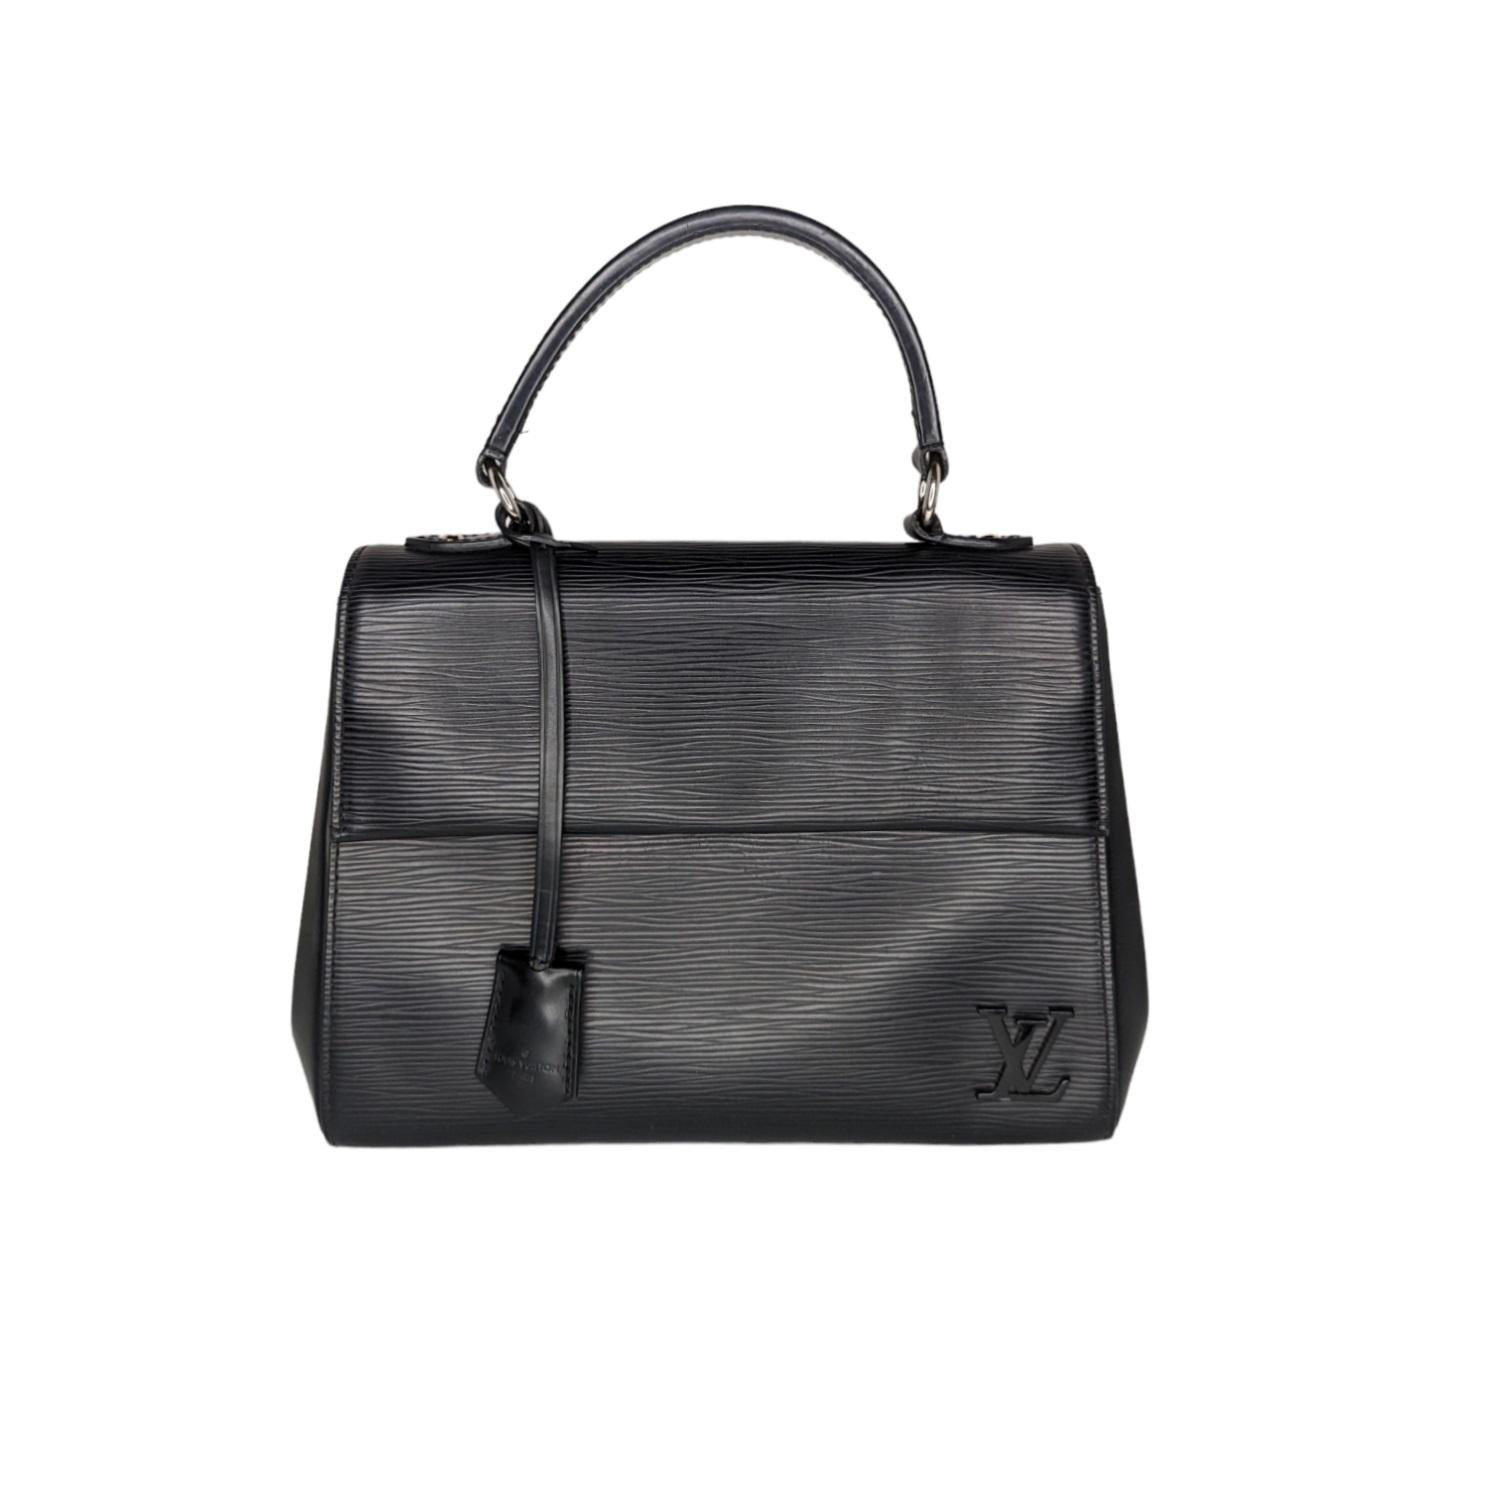 Cluny and Epi, made for each other: the Cluny BB handbag’s structured shape is ideally suited to textured Epi leather. This model can be worn cross-body or carried in ladylike fashion by the top handle. Designed for busy lifestyles, it opens wide